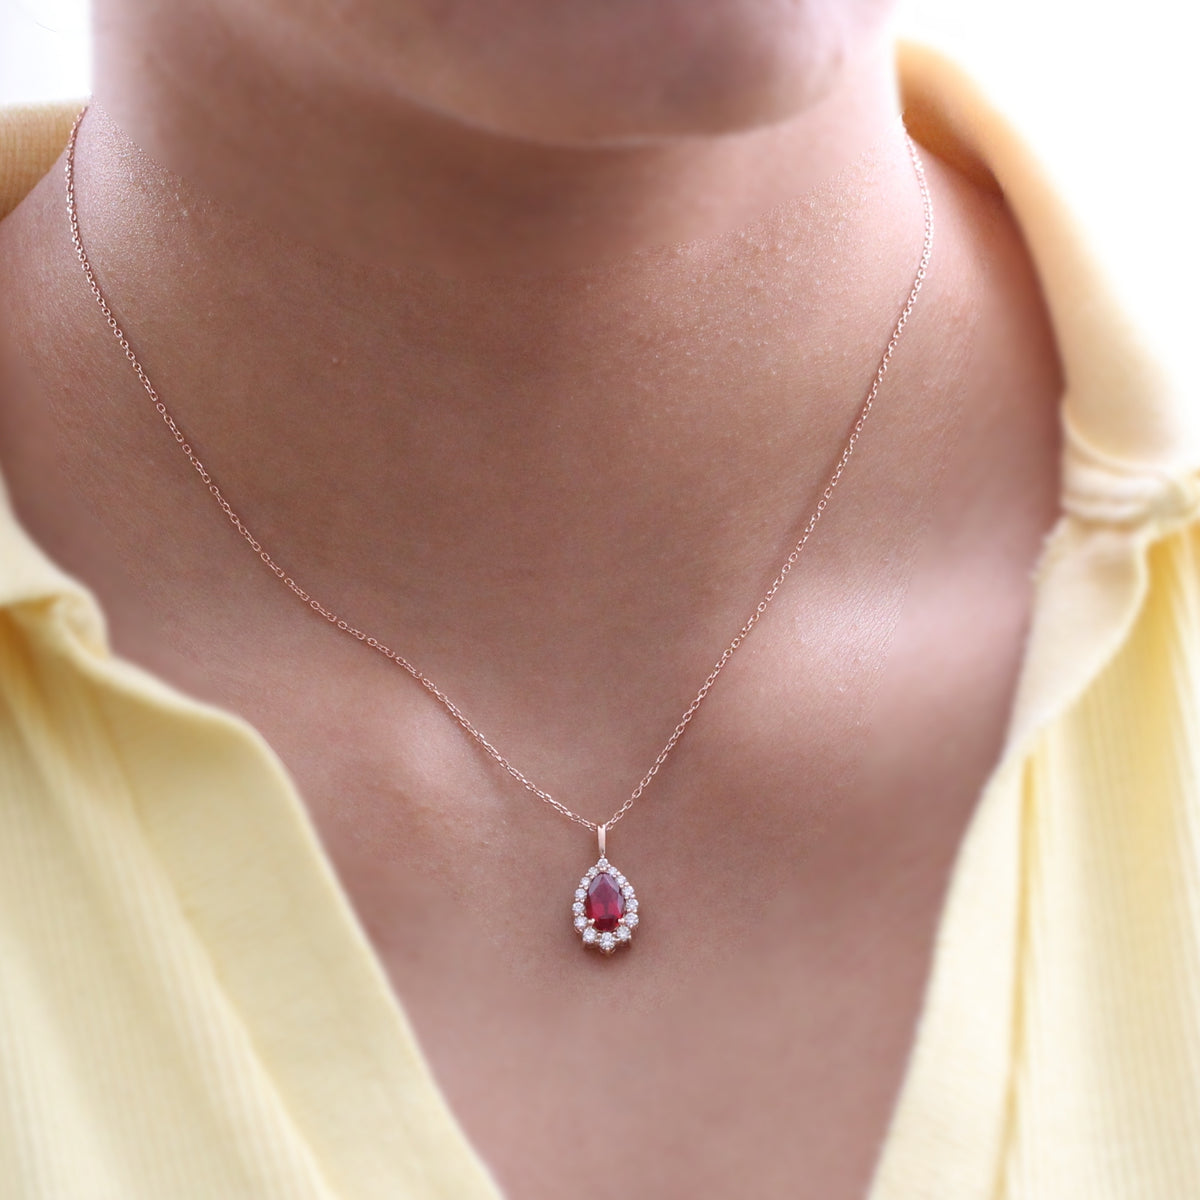 Pear ruby necklace rose gold halo style ruby diamond drop pendant necklace la more design jewelry